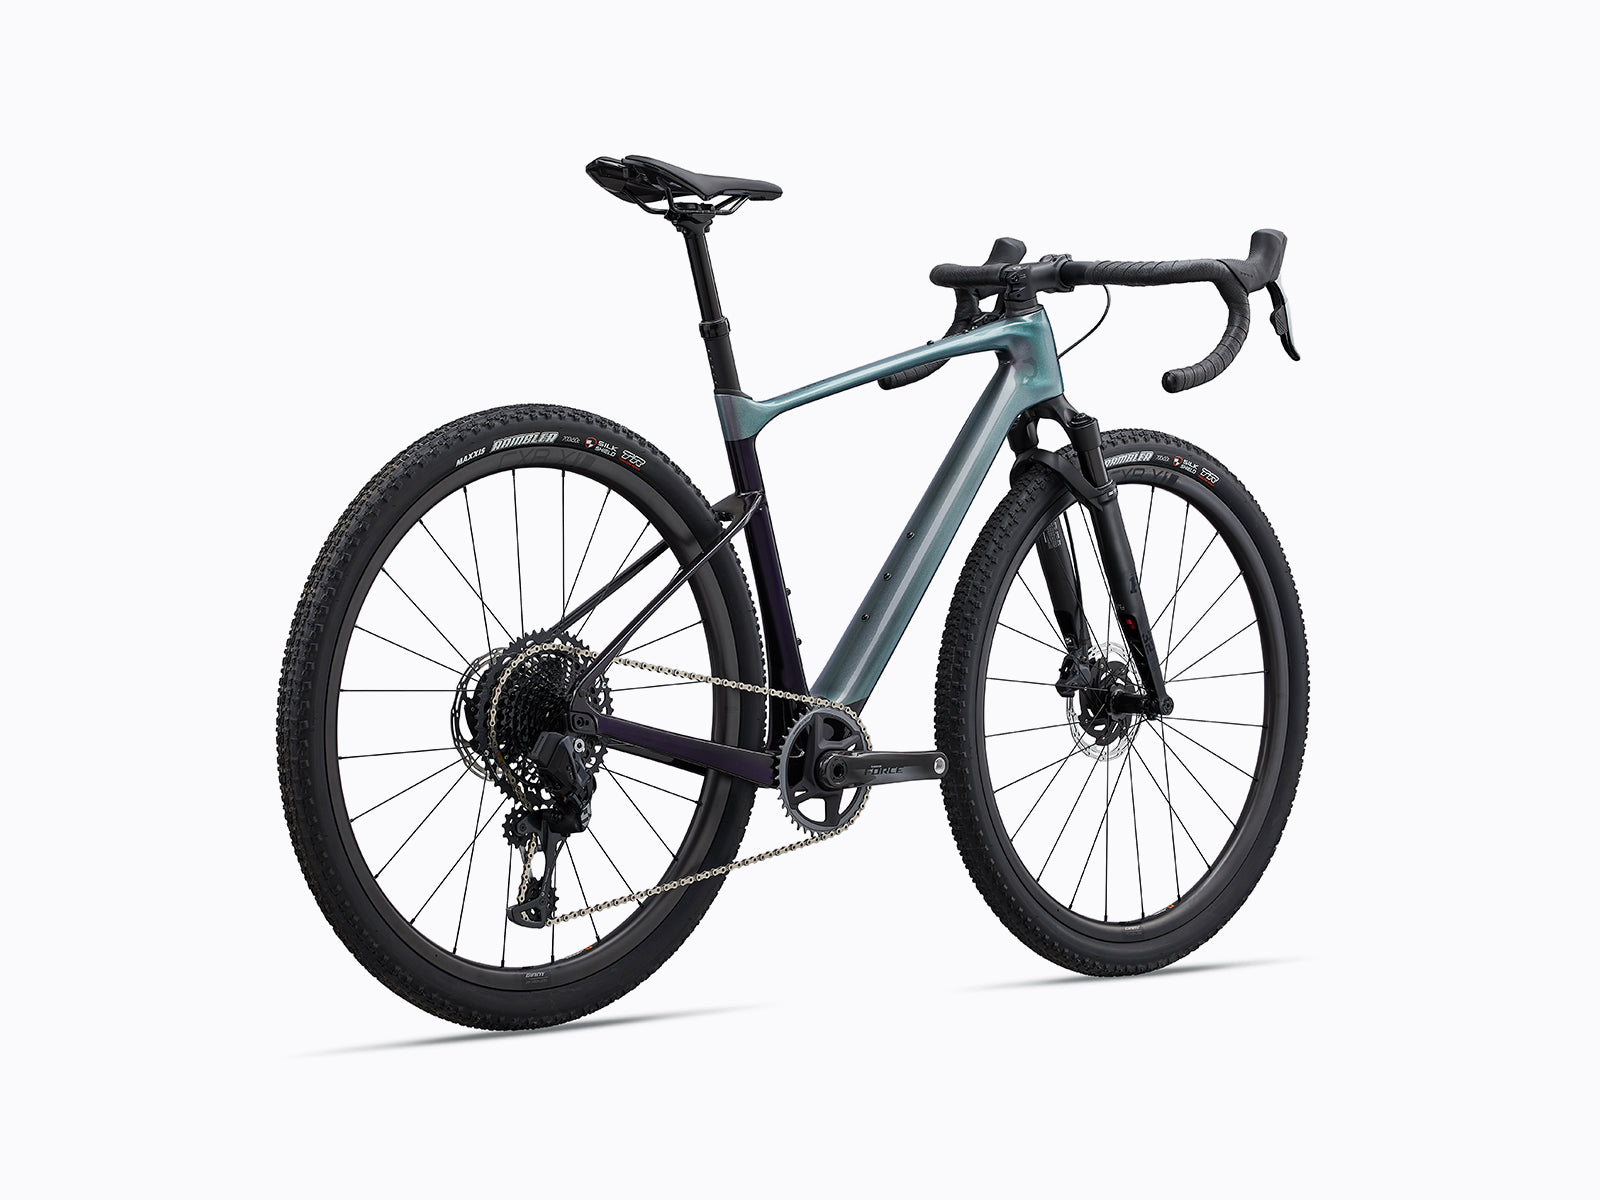 image features a giant revolt advanced pro 0, a gravel bike sold by Giant Melbourne, giant bicycles Australia